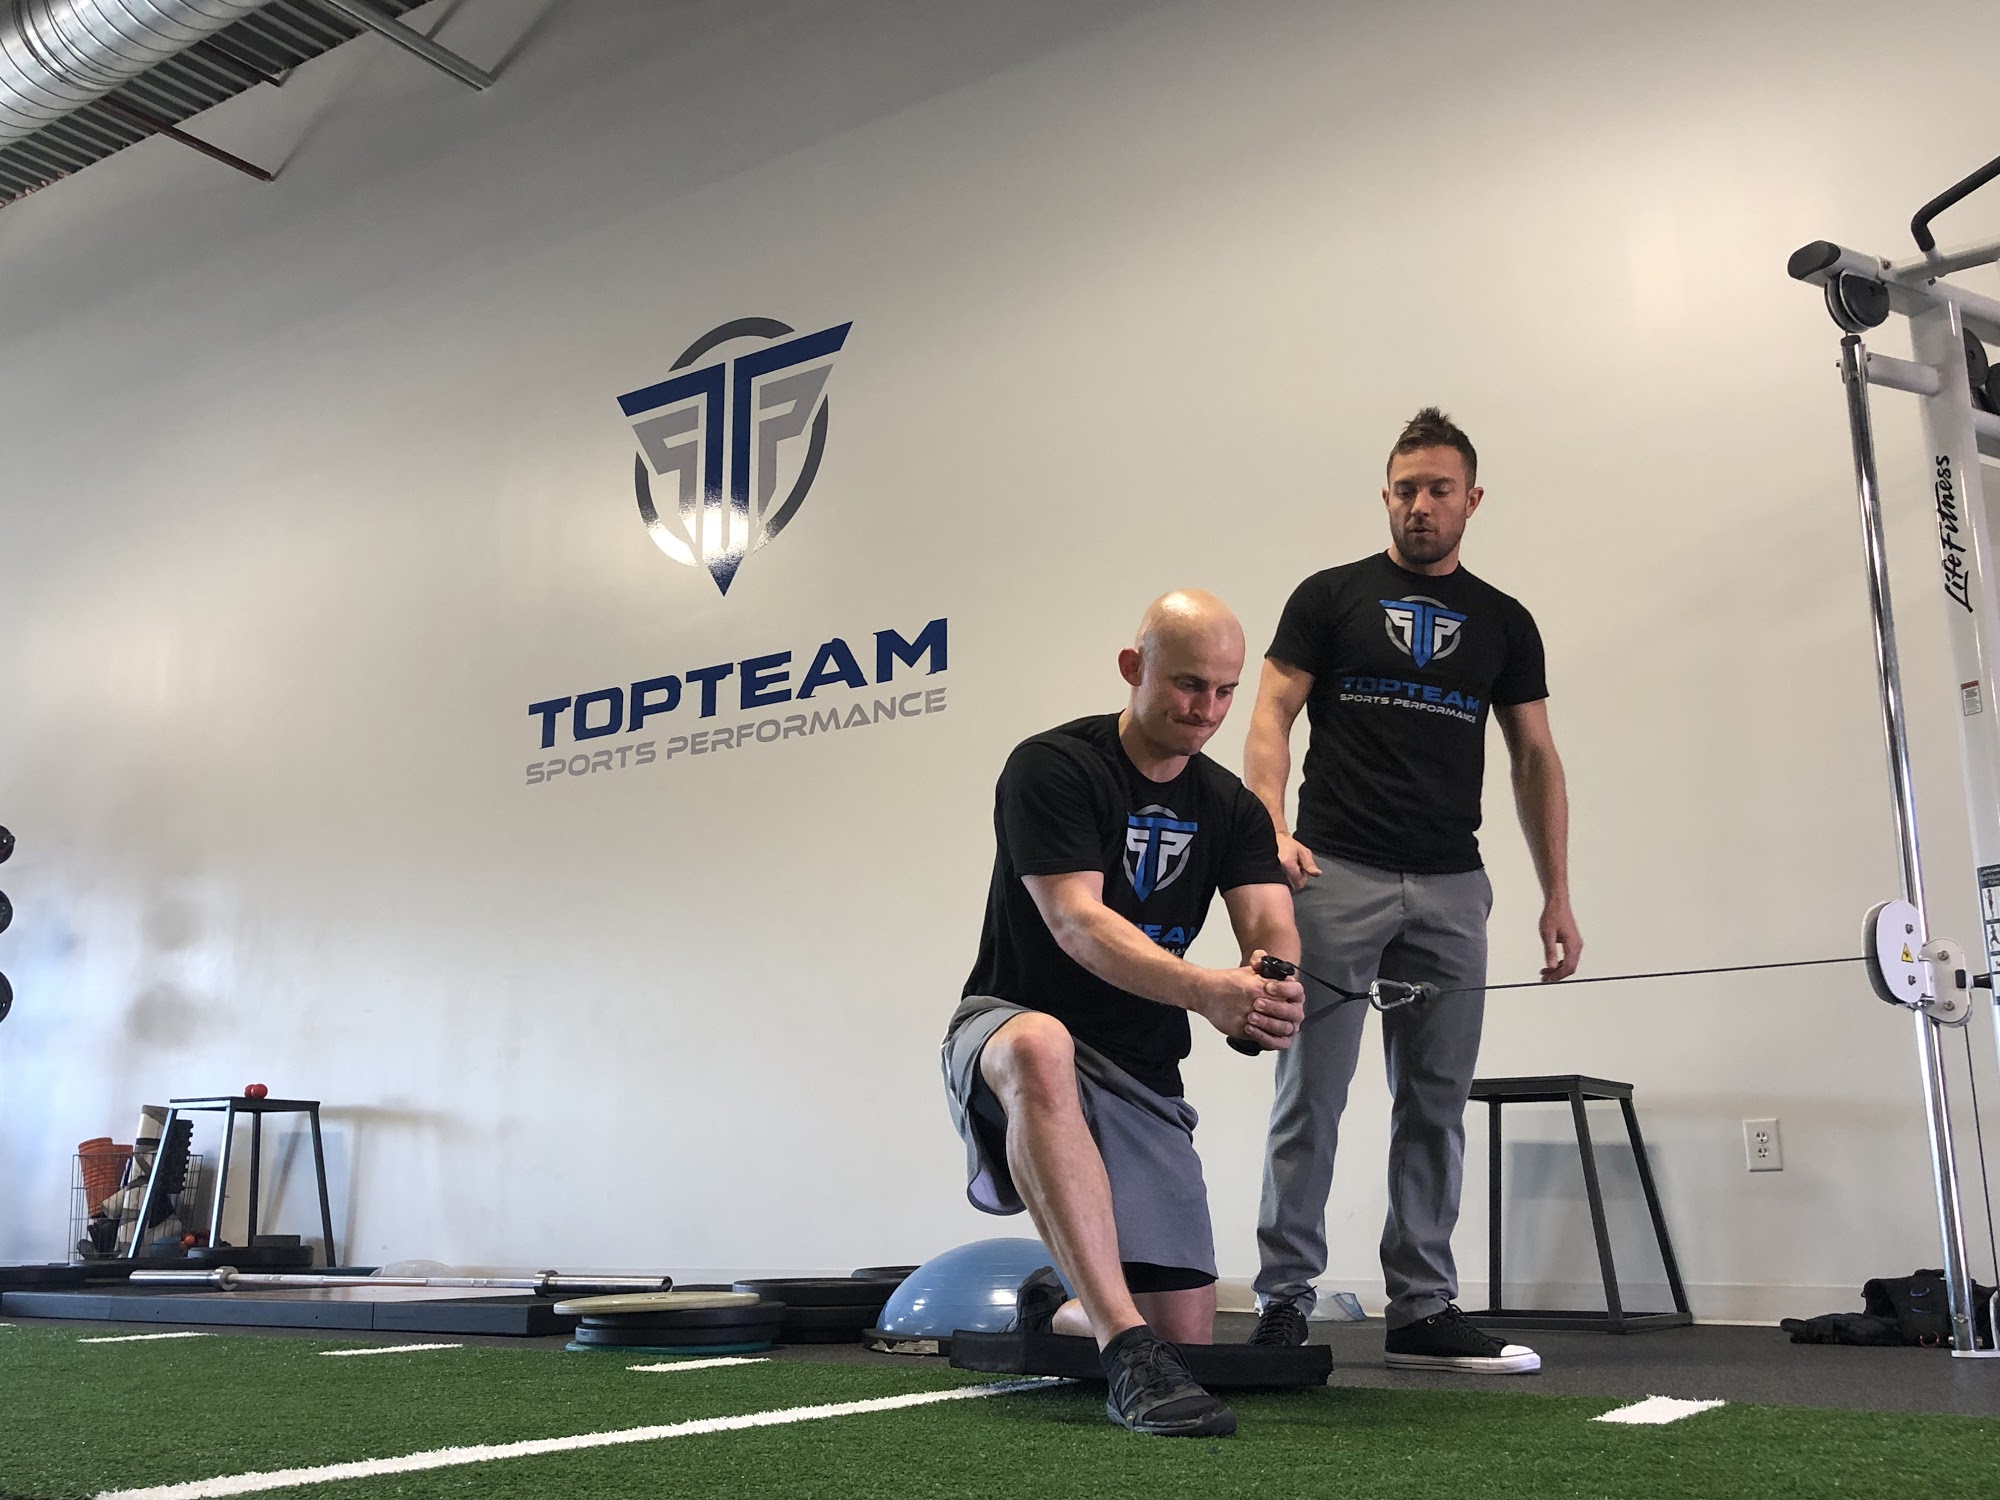 TOPTEAM Sports Performance